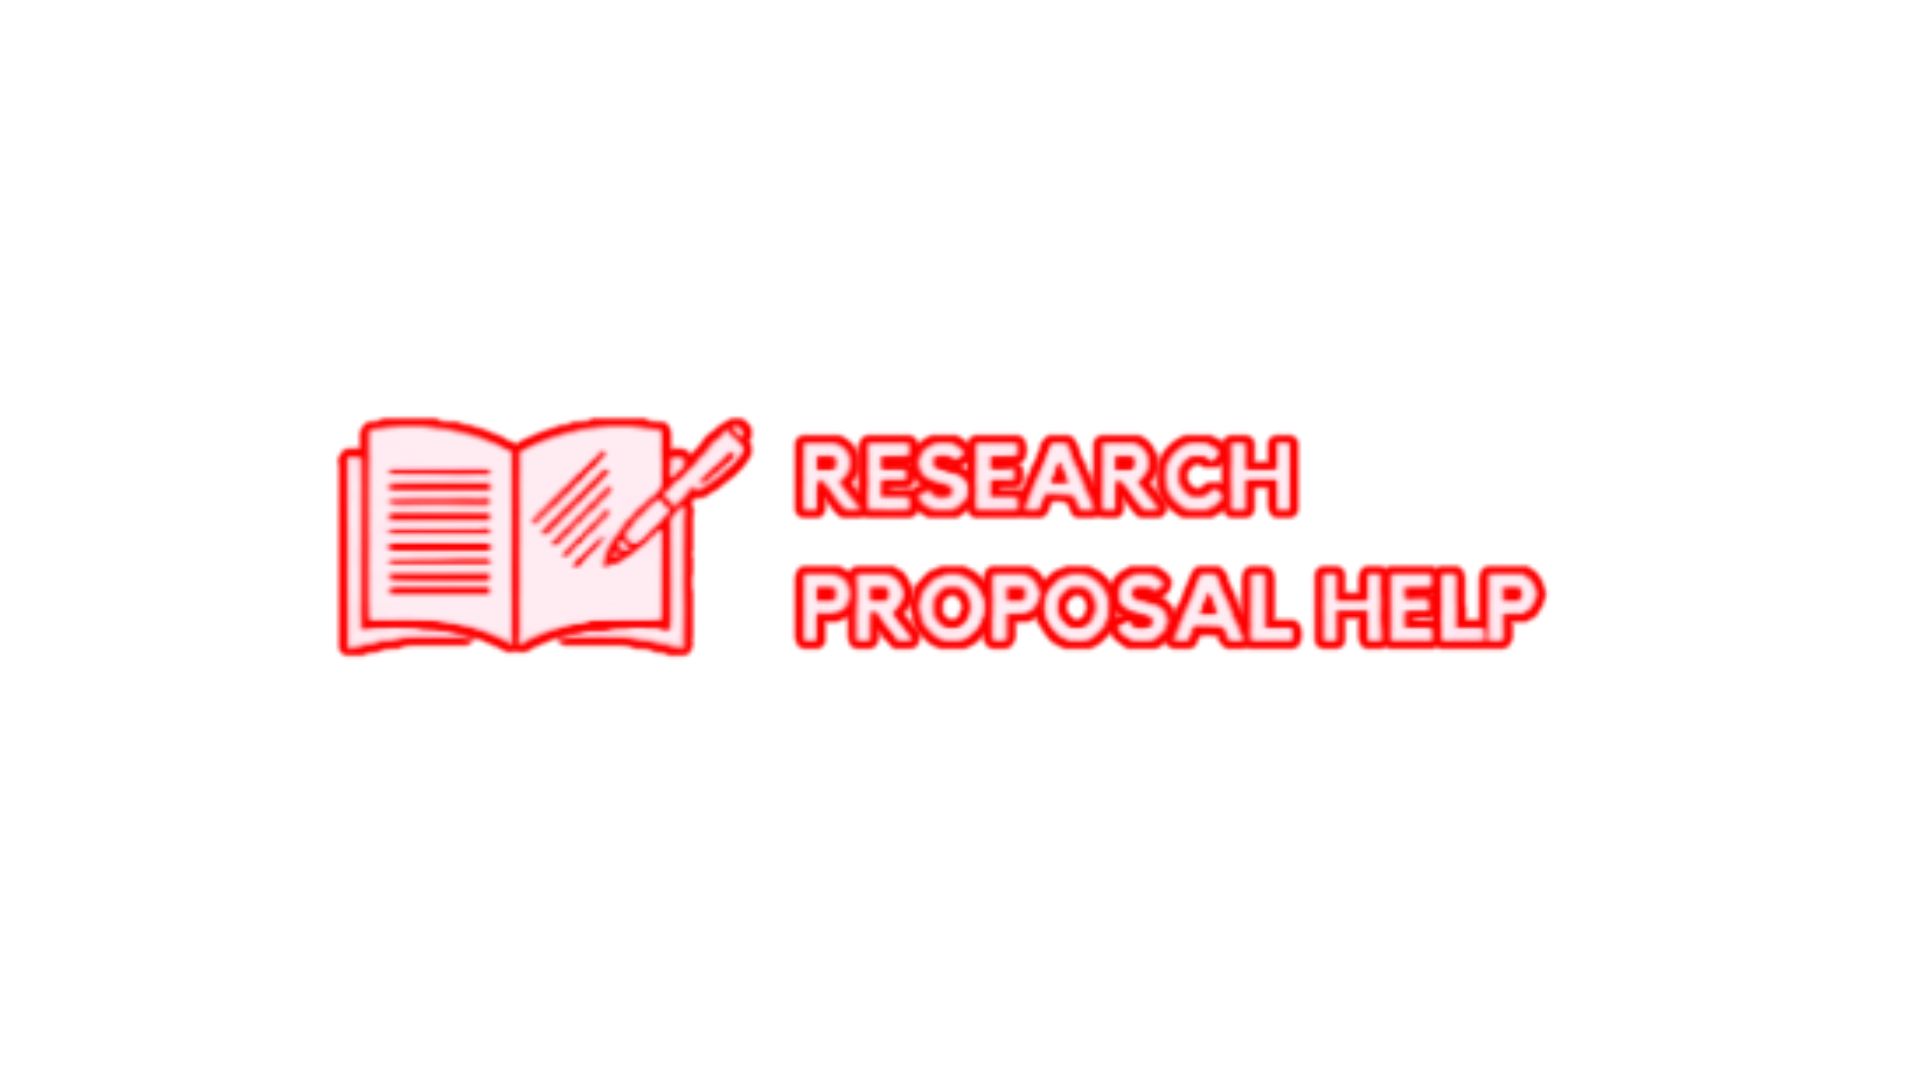 The Power of Precision: Crafting a Research Proposal That Gets Noticed